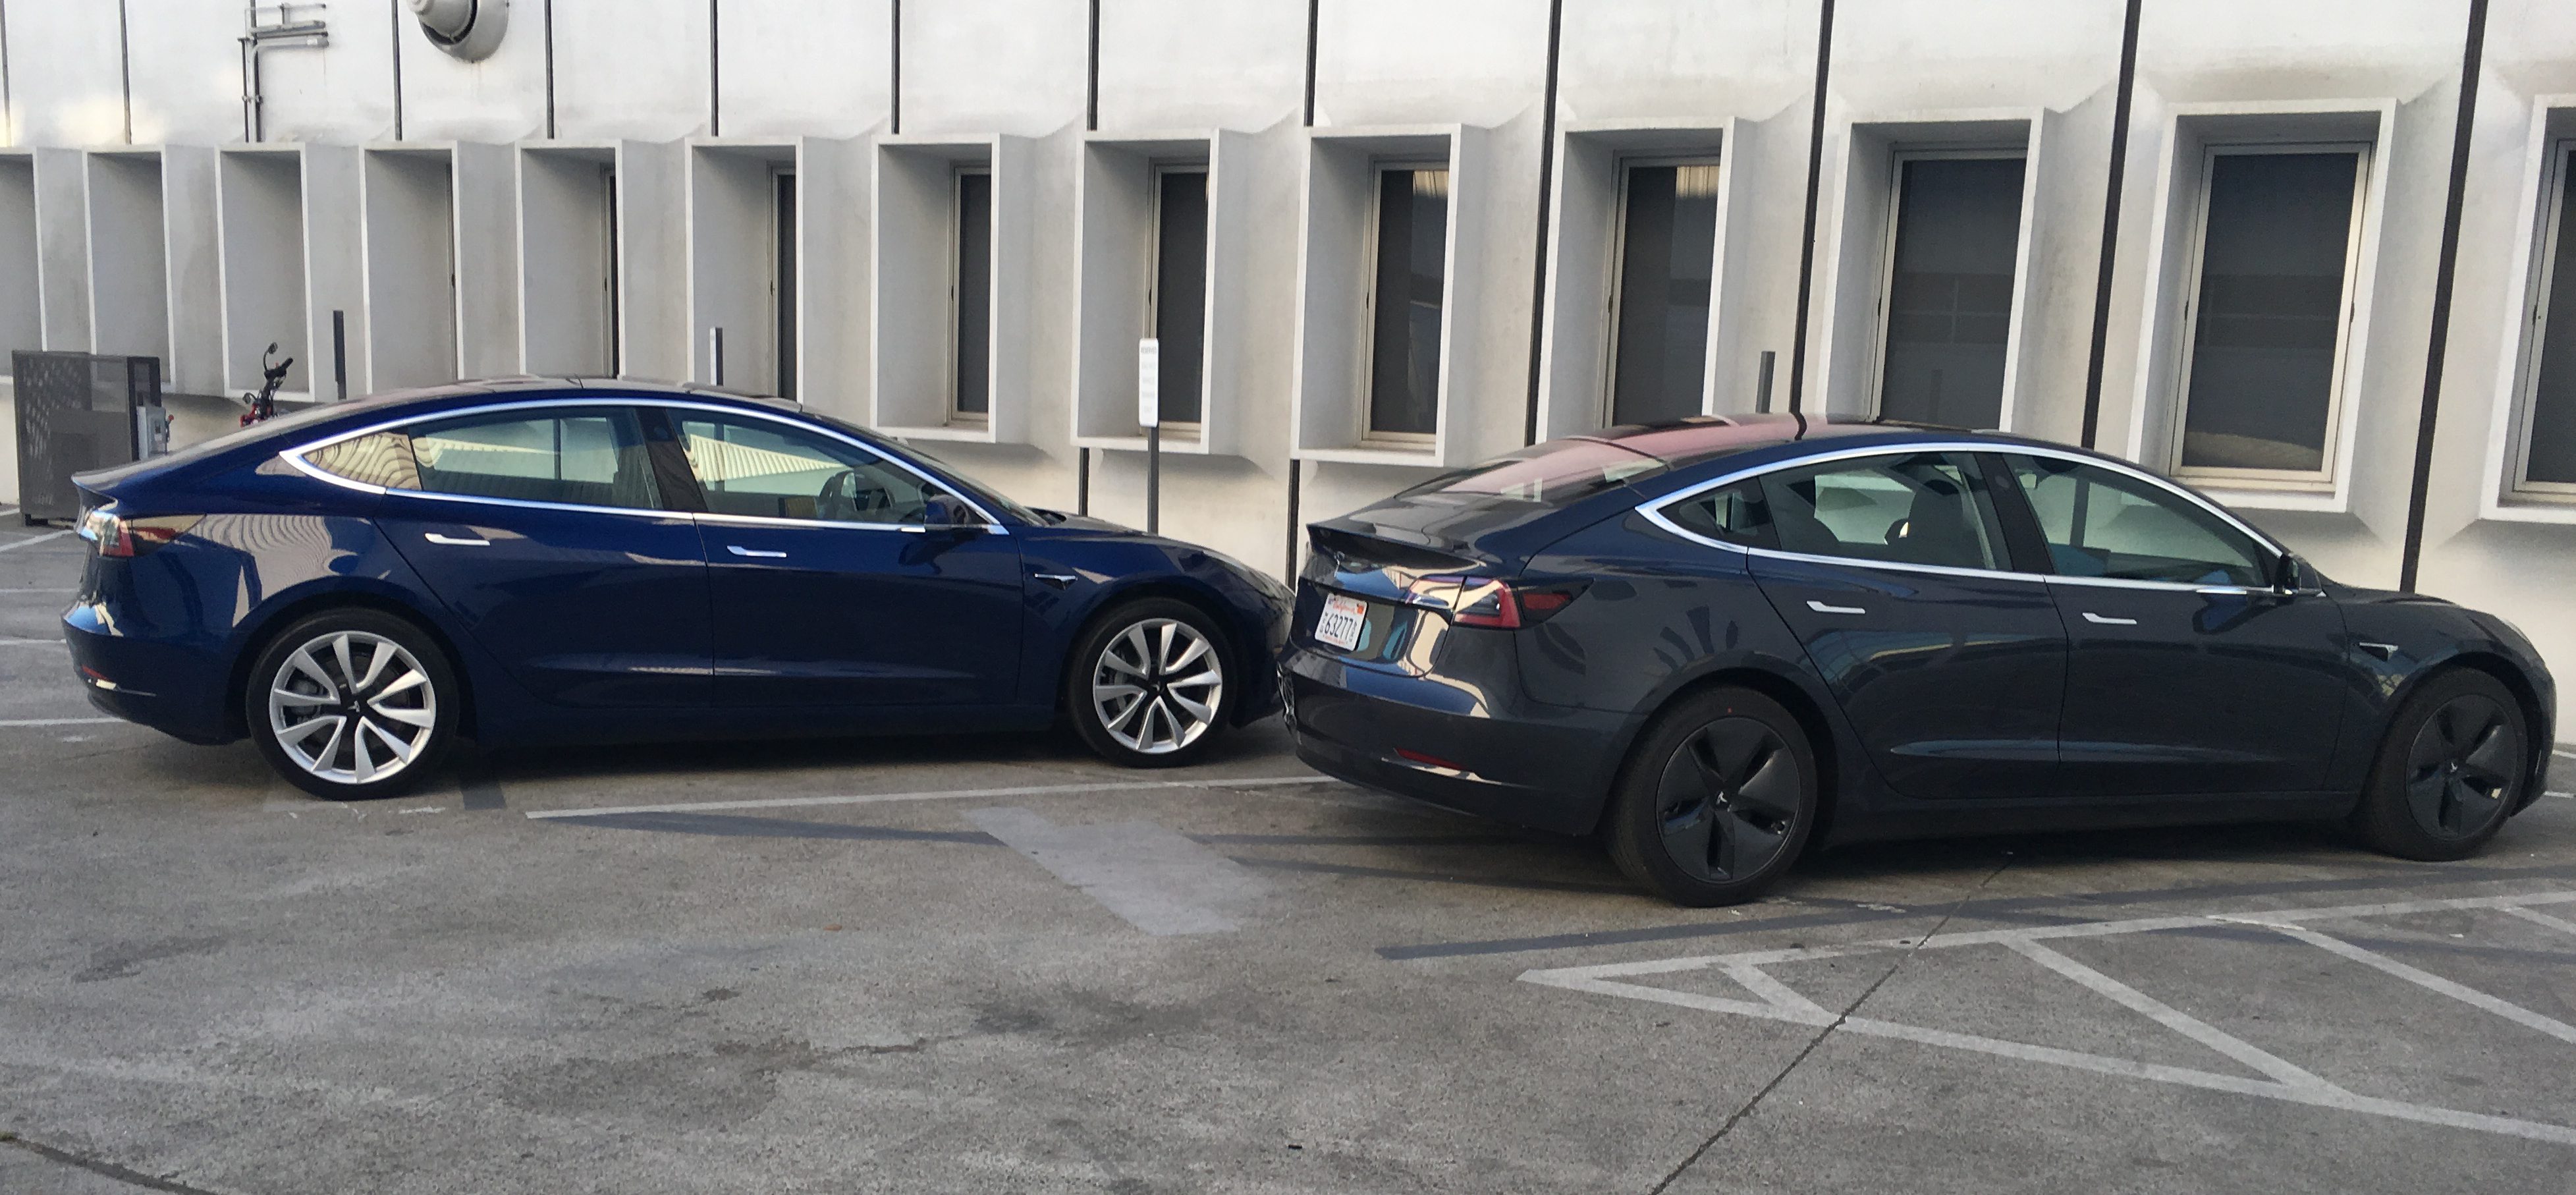 Tesla Model 3: Better Look At New Midnight Silver As More Production Units  Are Spotted | Electrek